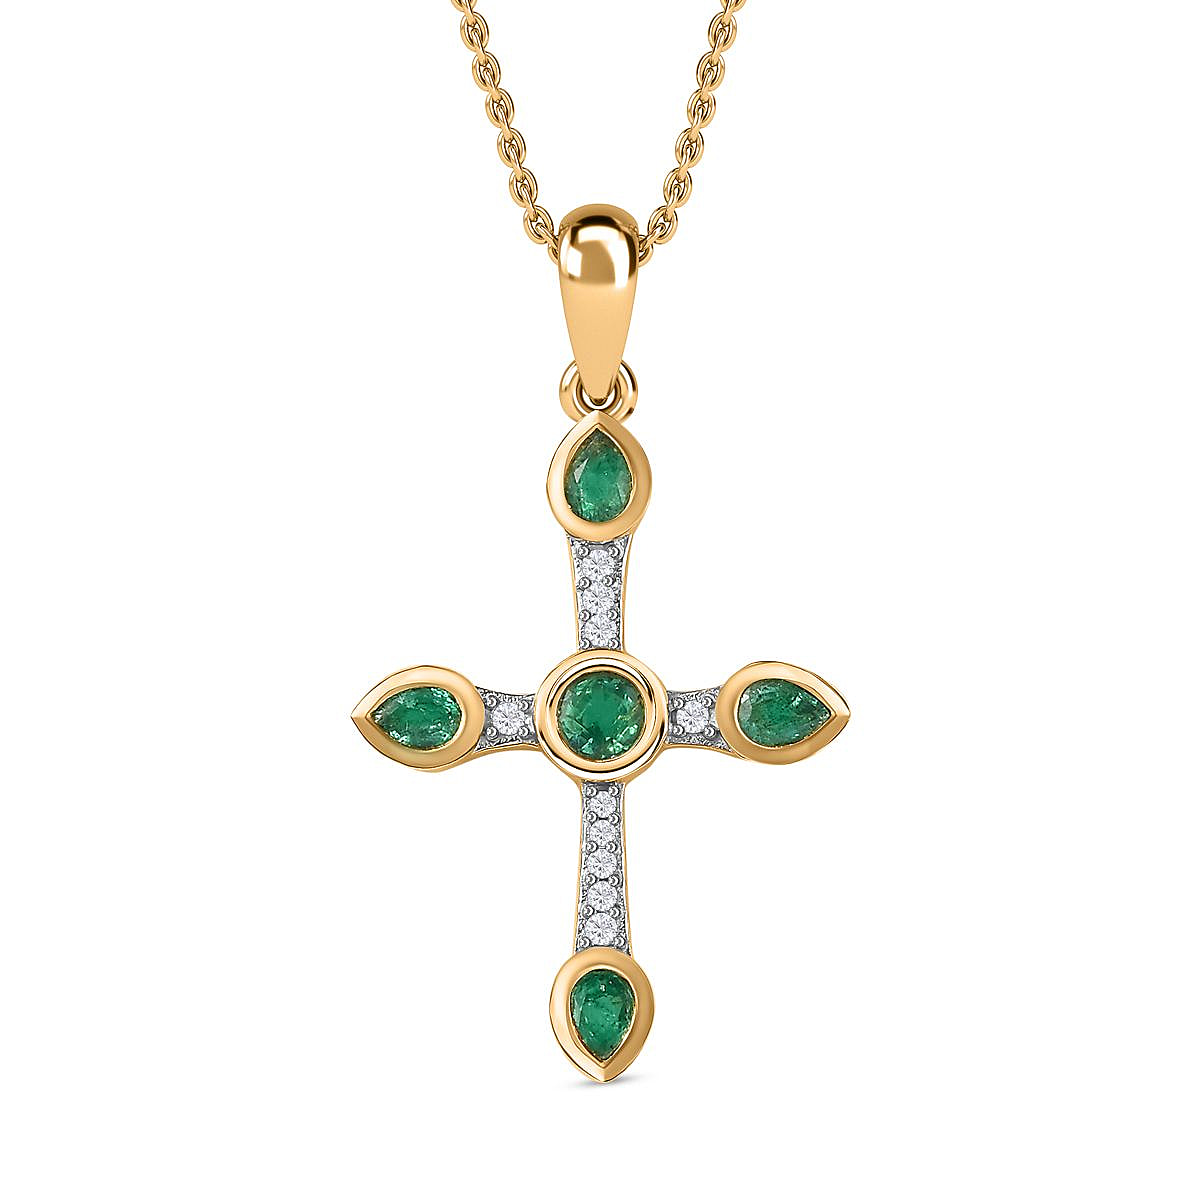 AAA Gemfields Emerald & Natural Zircon Cross Pendant with Chain (Size 20) in 18K Vermeil YG Plated Sterling Silver, Silver Wt. 5.87 GM